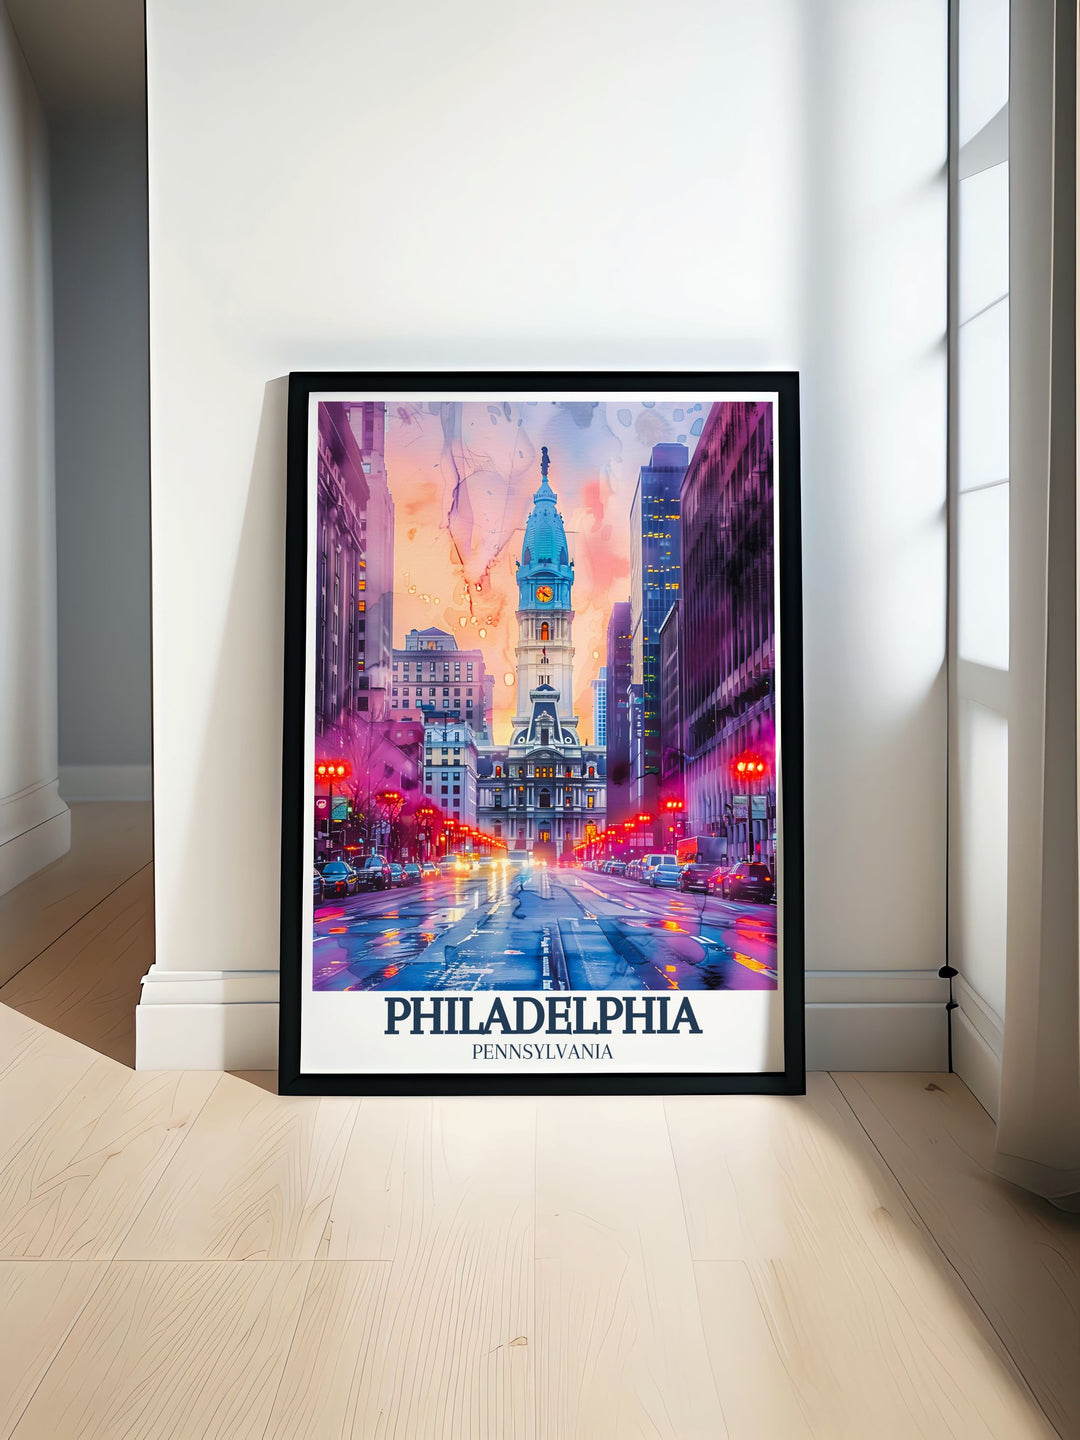 Philadelphia print capturing the historical beauty of Independence National Historical Park Franklin Institute and City Hall perfect for home decor and as a unique travel gift for art lovers and history enthusiasts